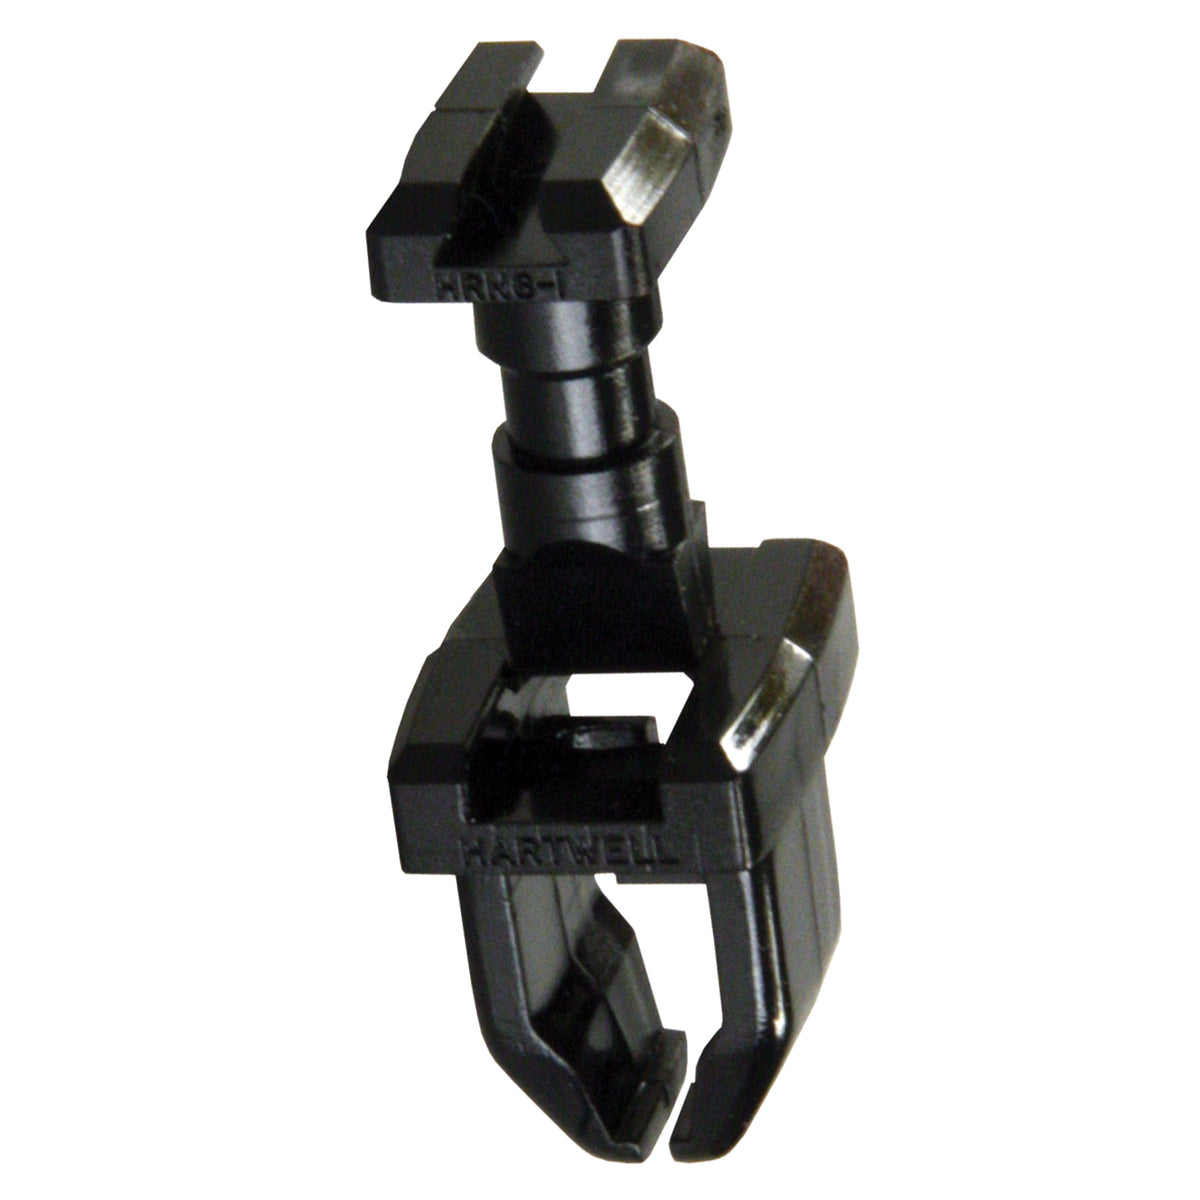 JR Products 00245 Vent Latch - Thick Wall